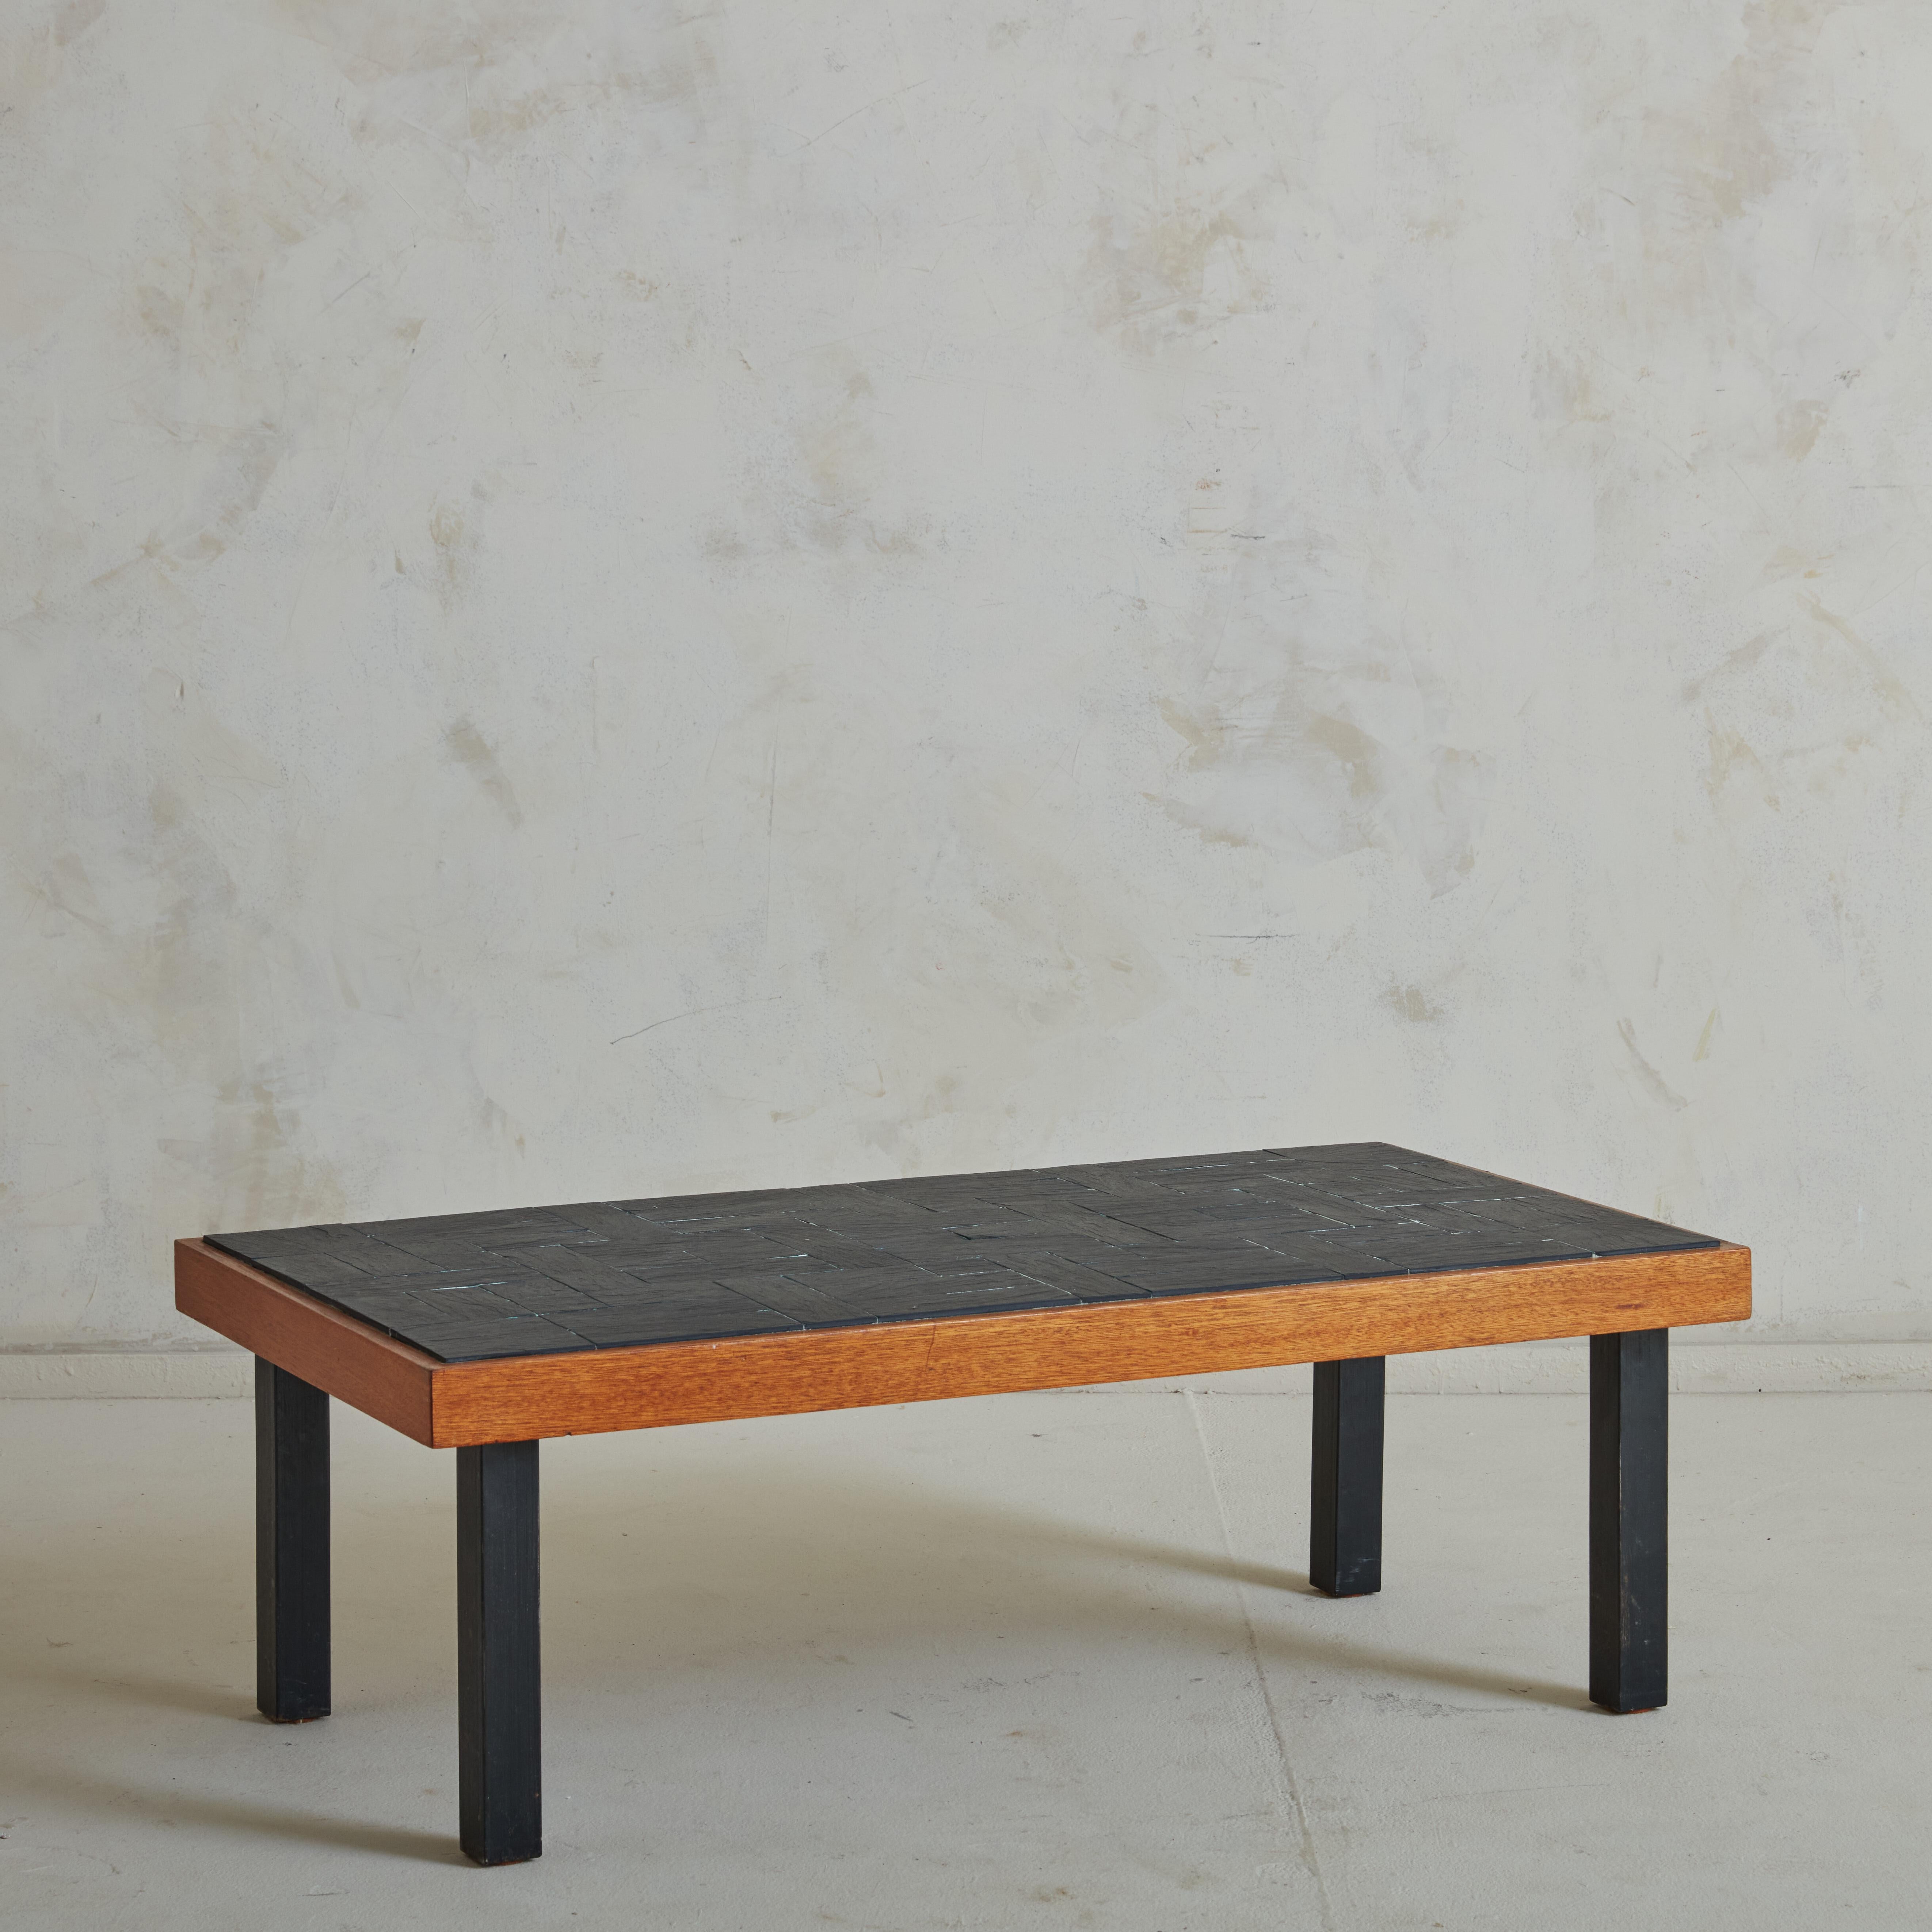 A vintage coffee table featuring an elm wood frame and slate tile top with painted wood legs. This design correlated heavily with Pierre Chapo’s collaboration with Maison Regain, which featured a slate tile elm wood coffee table. This table is a